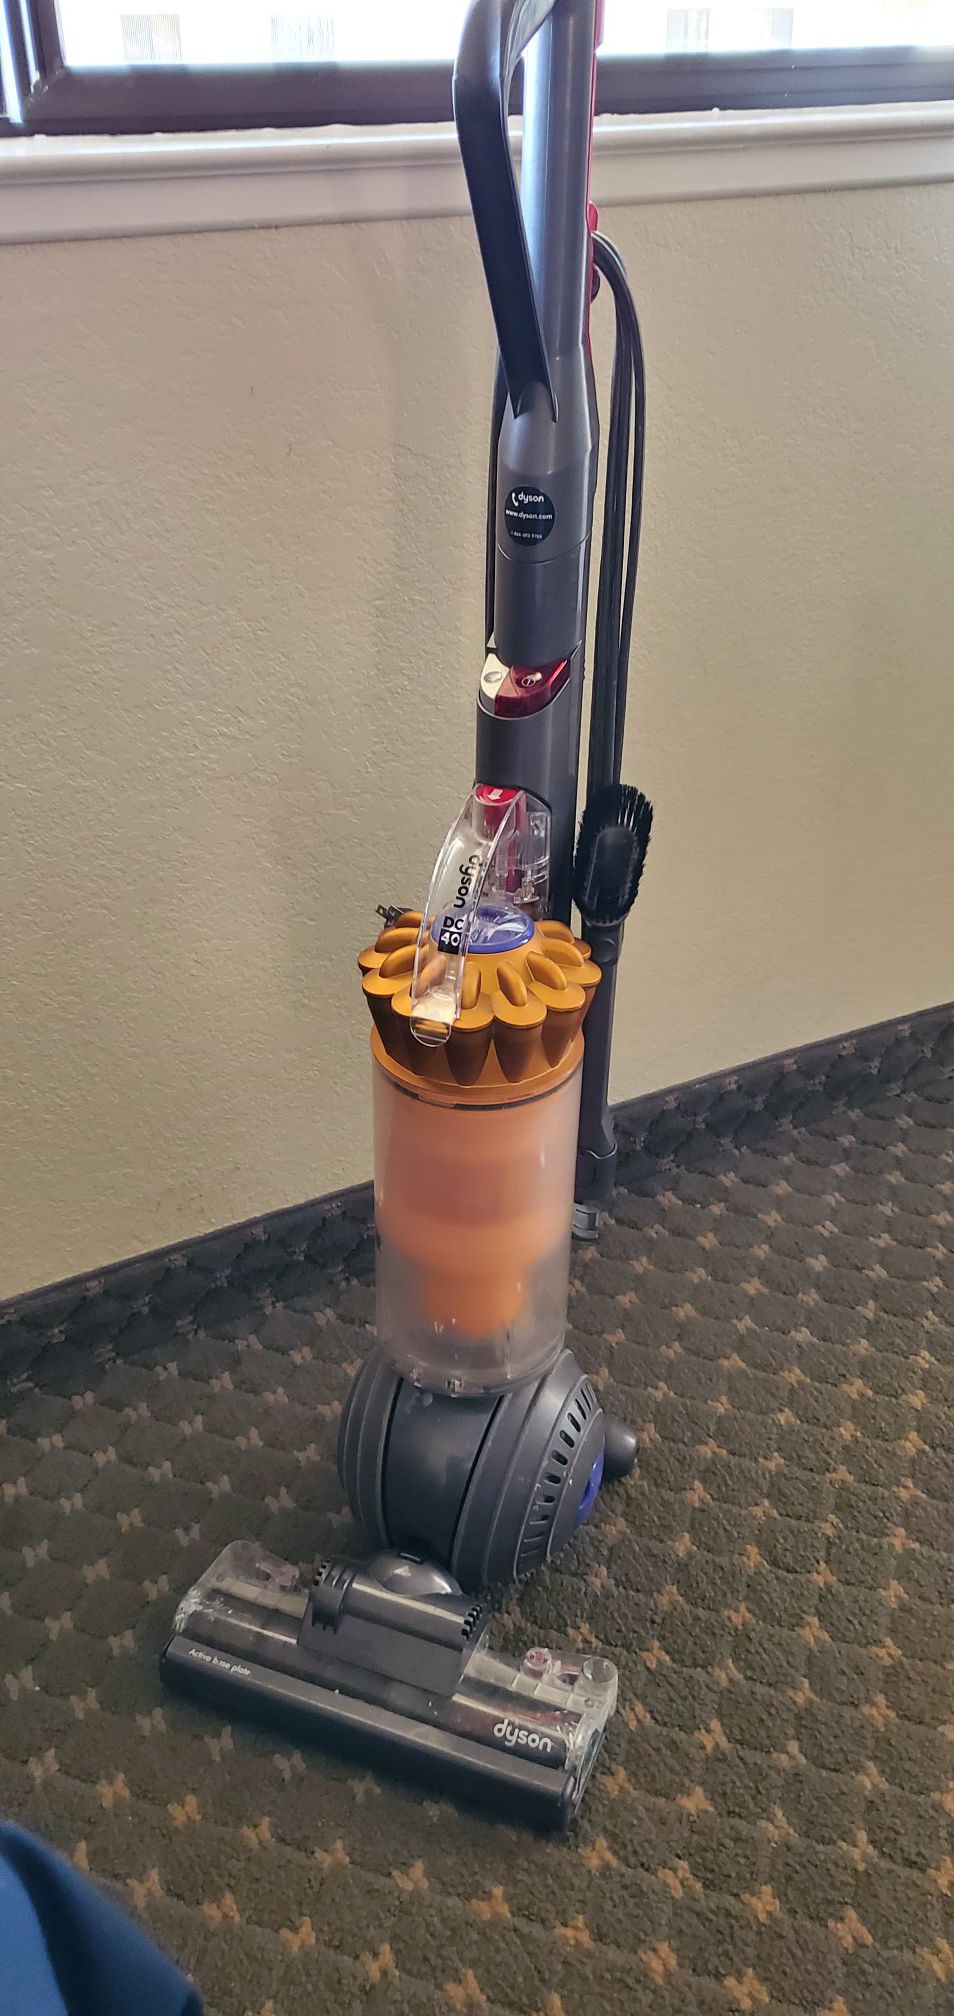 Dyson Dc40 used selling for 60$